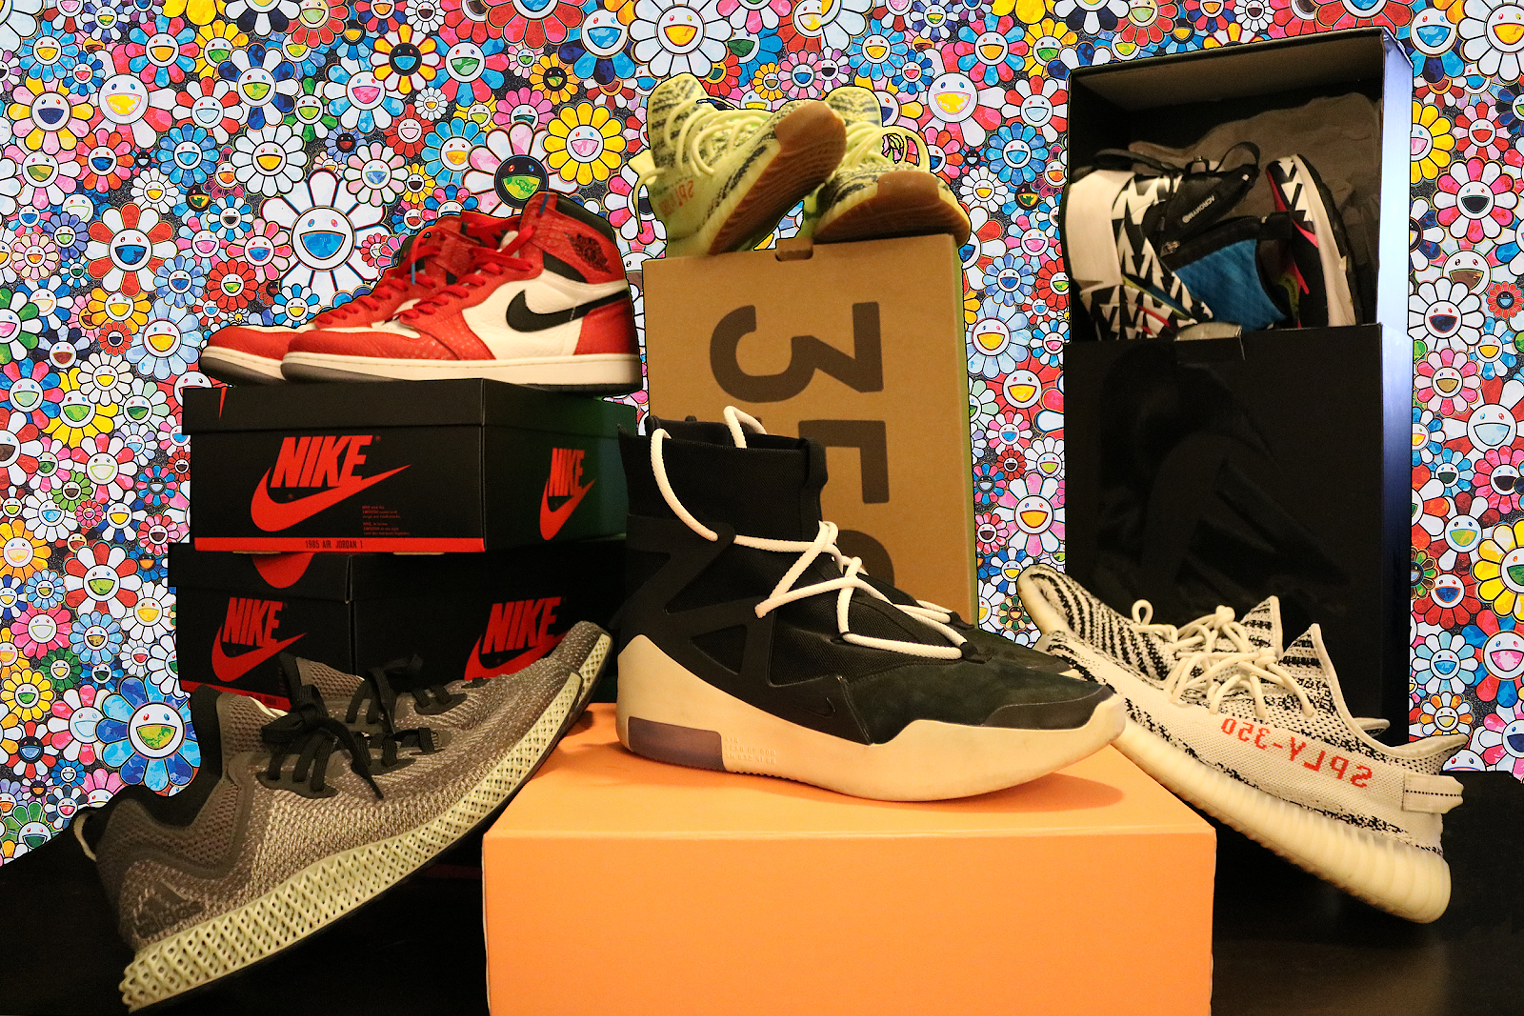 Beginner's Guide To Collecting Sneakers In 2022